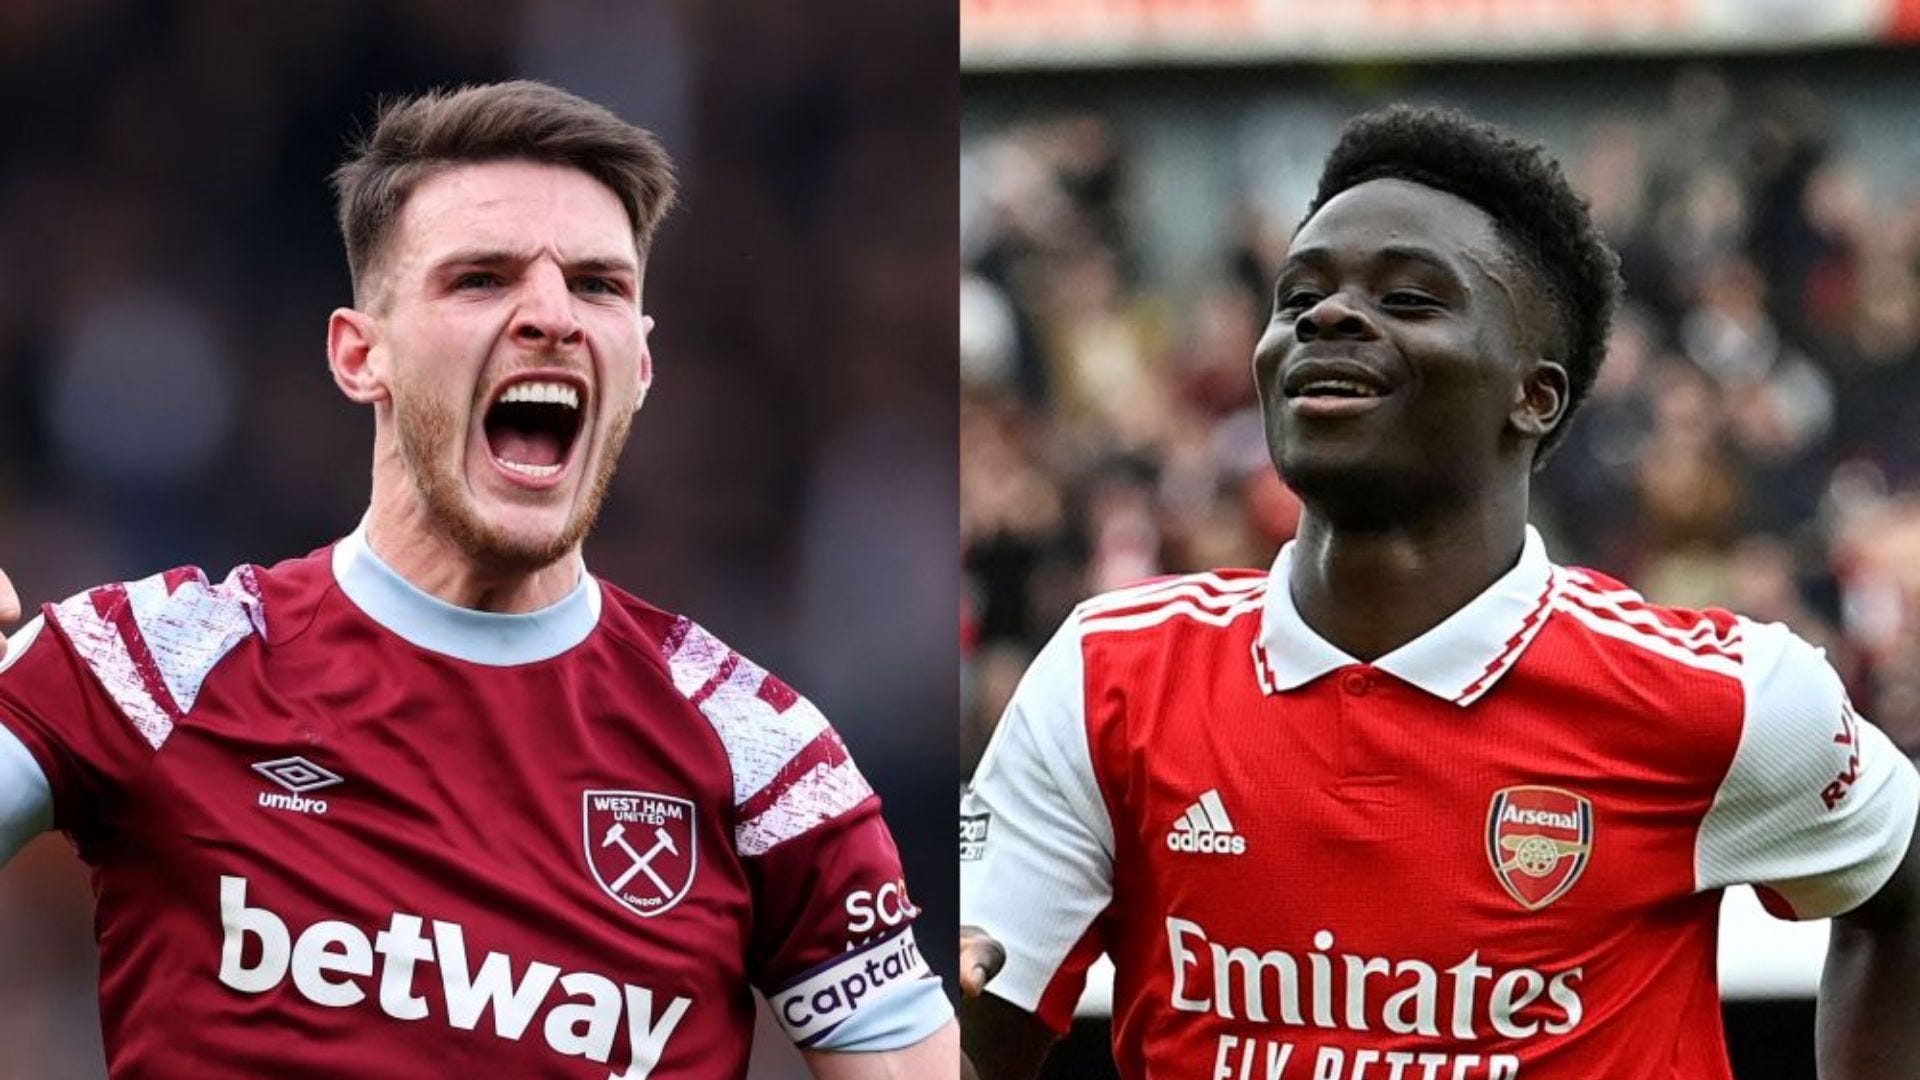 West Ham vs Arsenal Where to watch the match online, live stream, TV channels and kick-off time Goal Cameroon